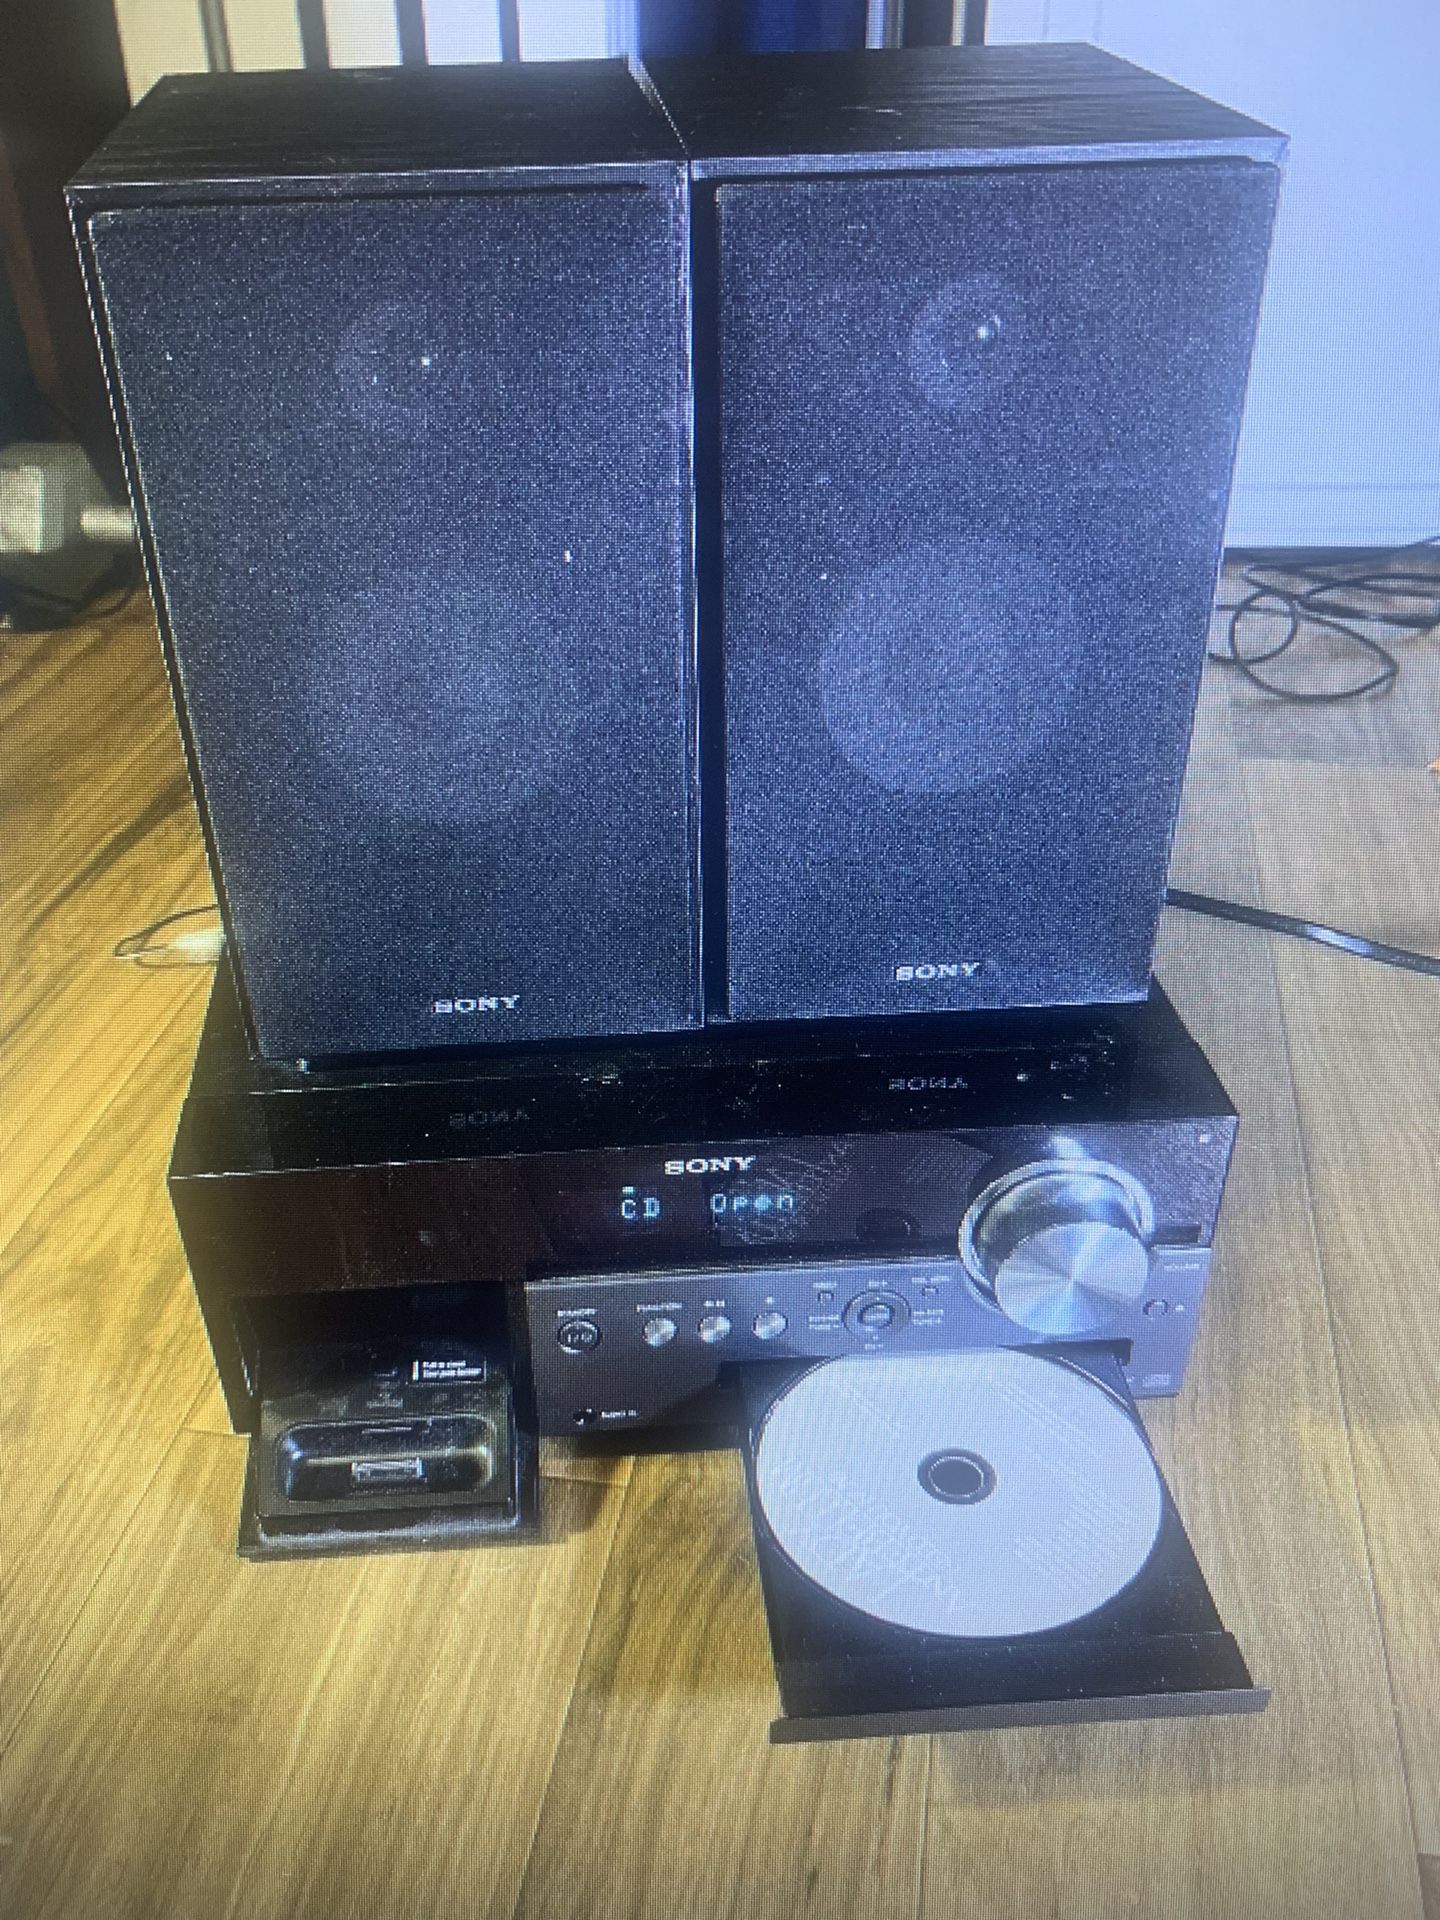 Sony Micro Stereo System W/ Speakers CD Plsyer Ipod Doc